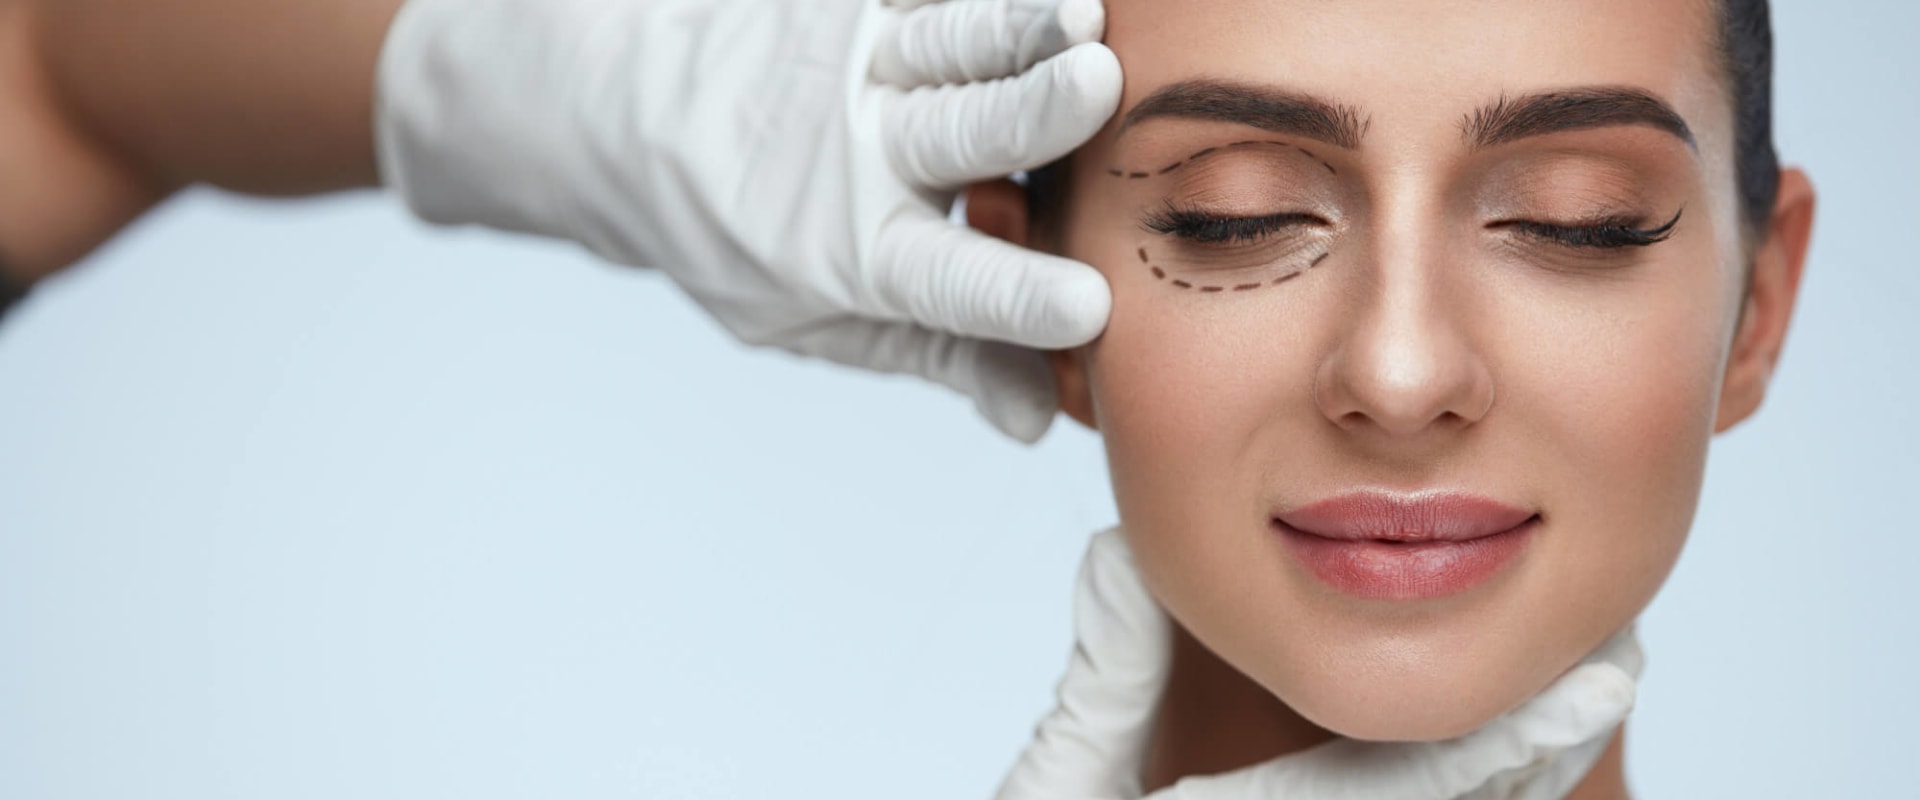 The Top 5 Most Popular Plastic and Cosmetic Surgeries: An Expert's Perspective